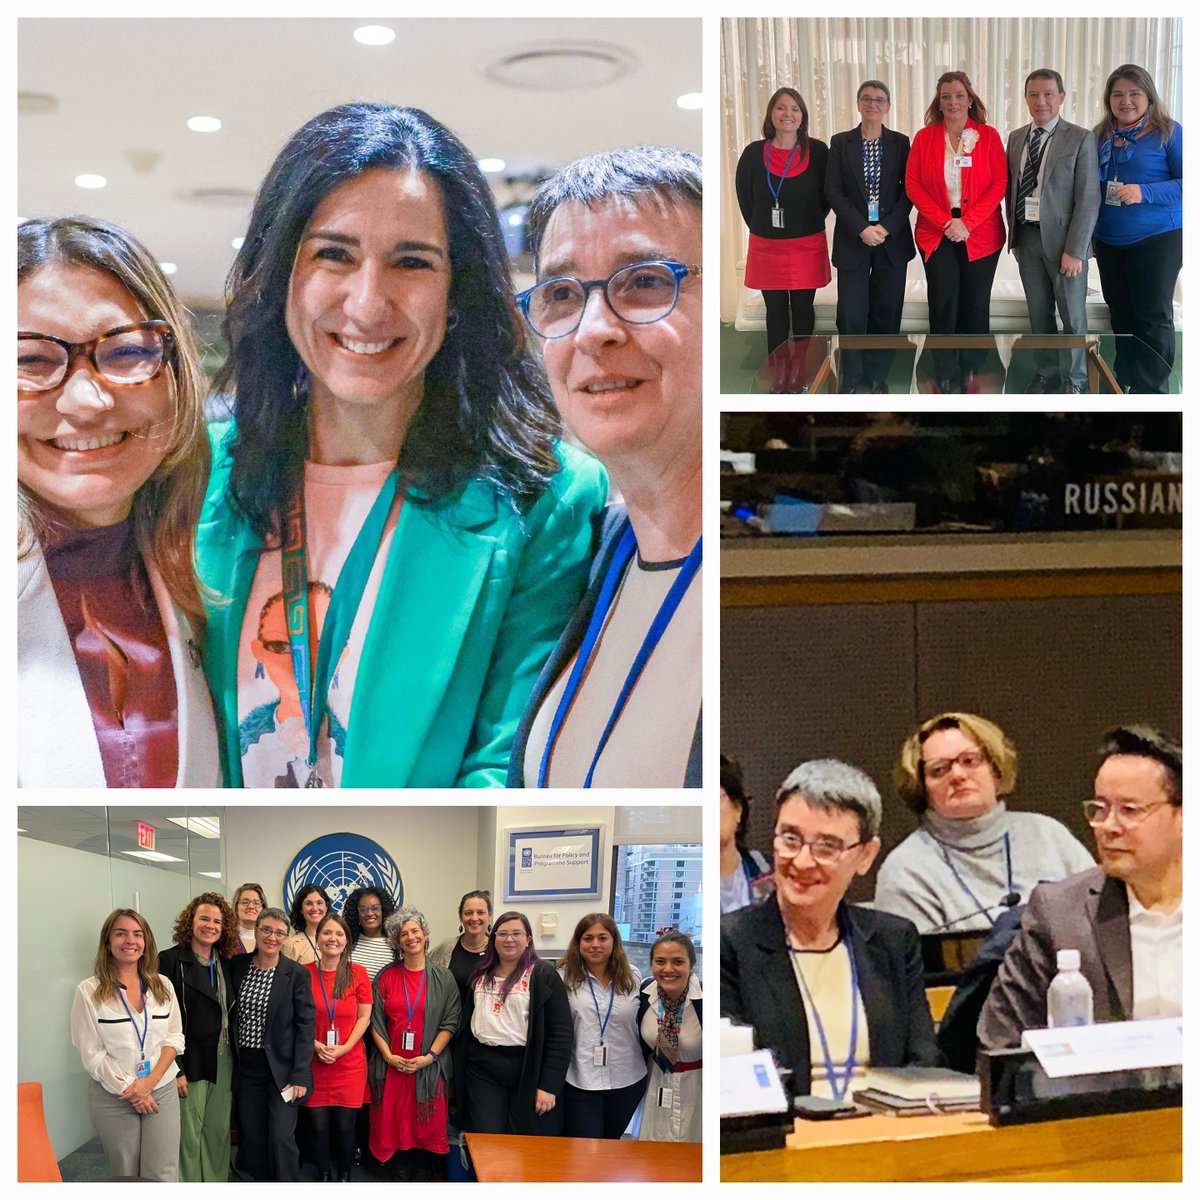 Intense 2 weeks of #CSW68 where #UNDP has been very active, engaging with governments from Brazil or Paraguay, discussing backlash with European Parliamentarians, or analysing financing for gender equality with top leaders across the world. #Genderequality #investinwomen